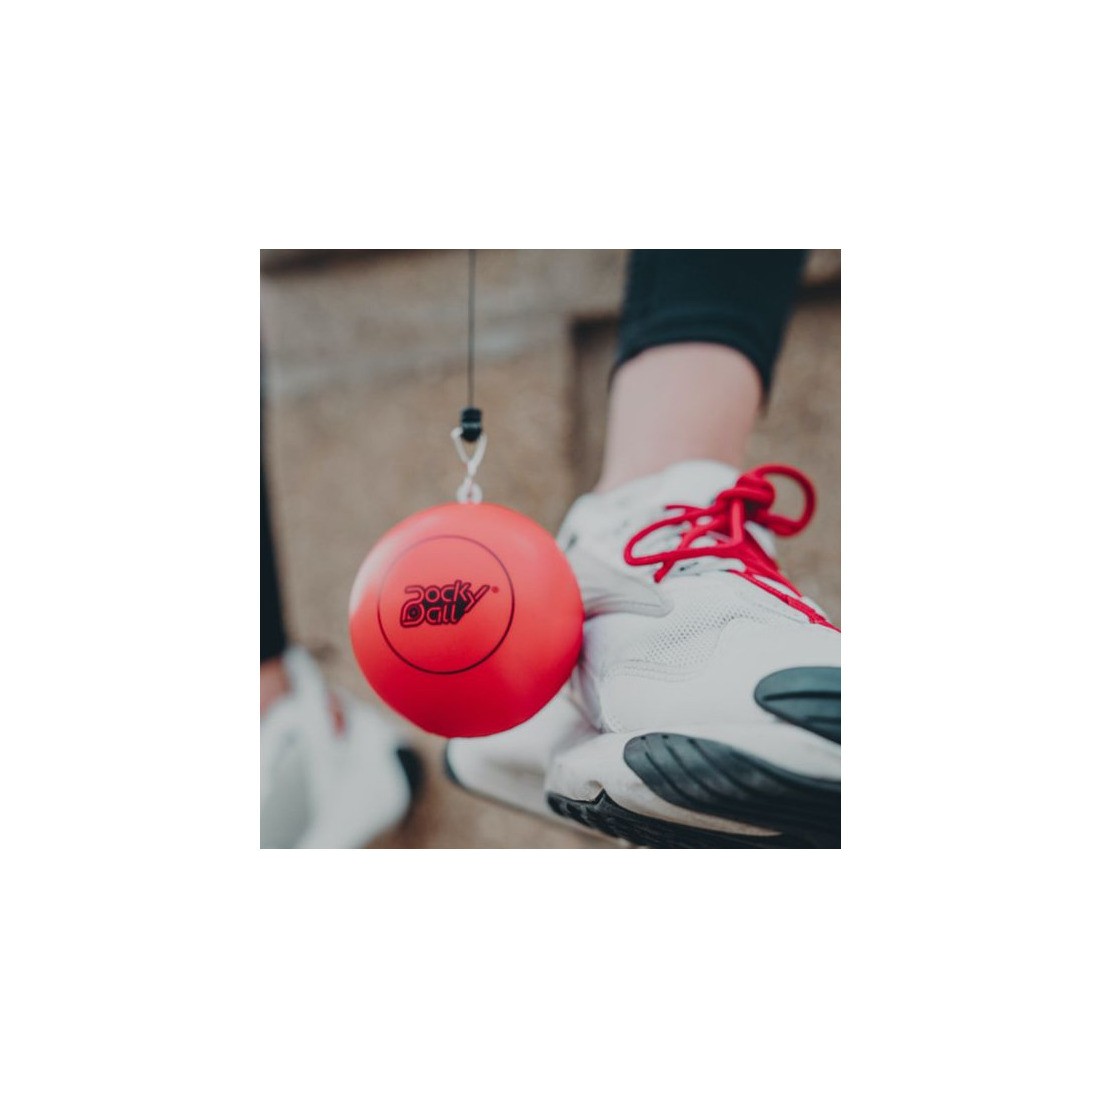 Pocky Ball Rouge - Jouet sportif et foot - Pockyball